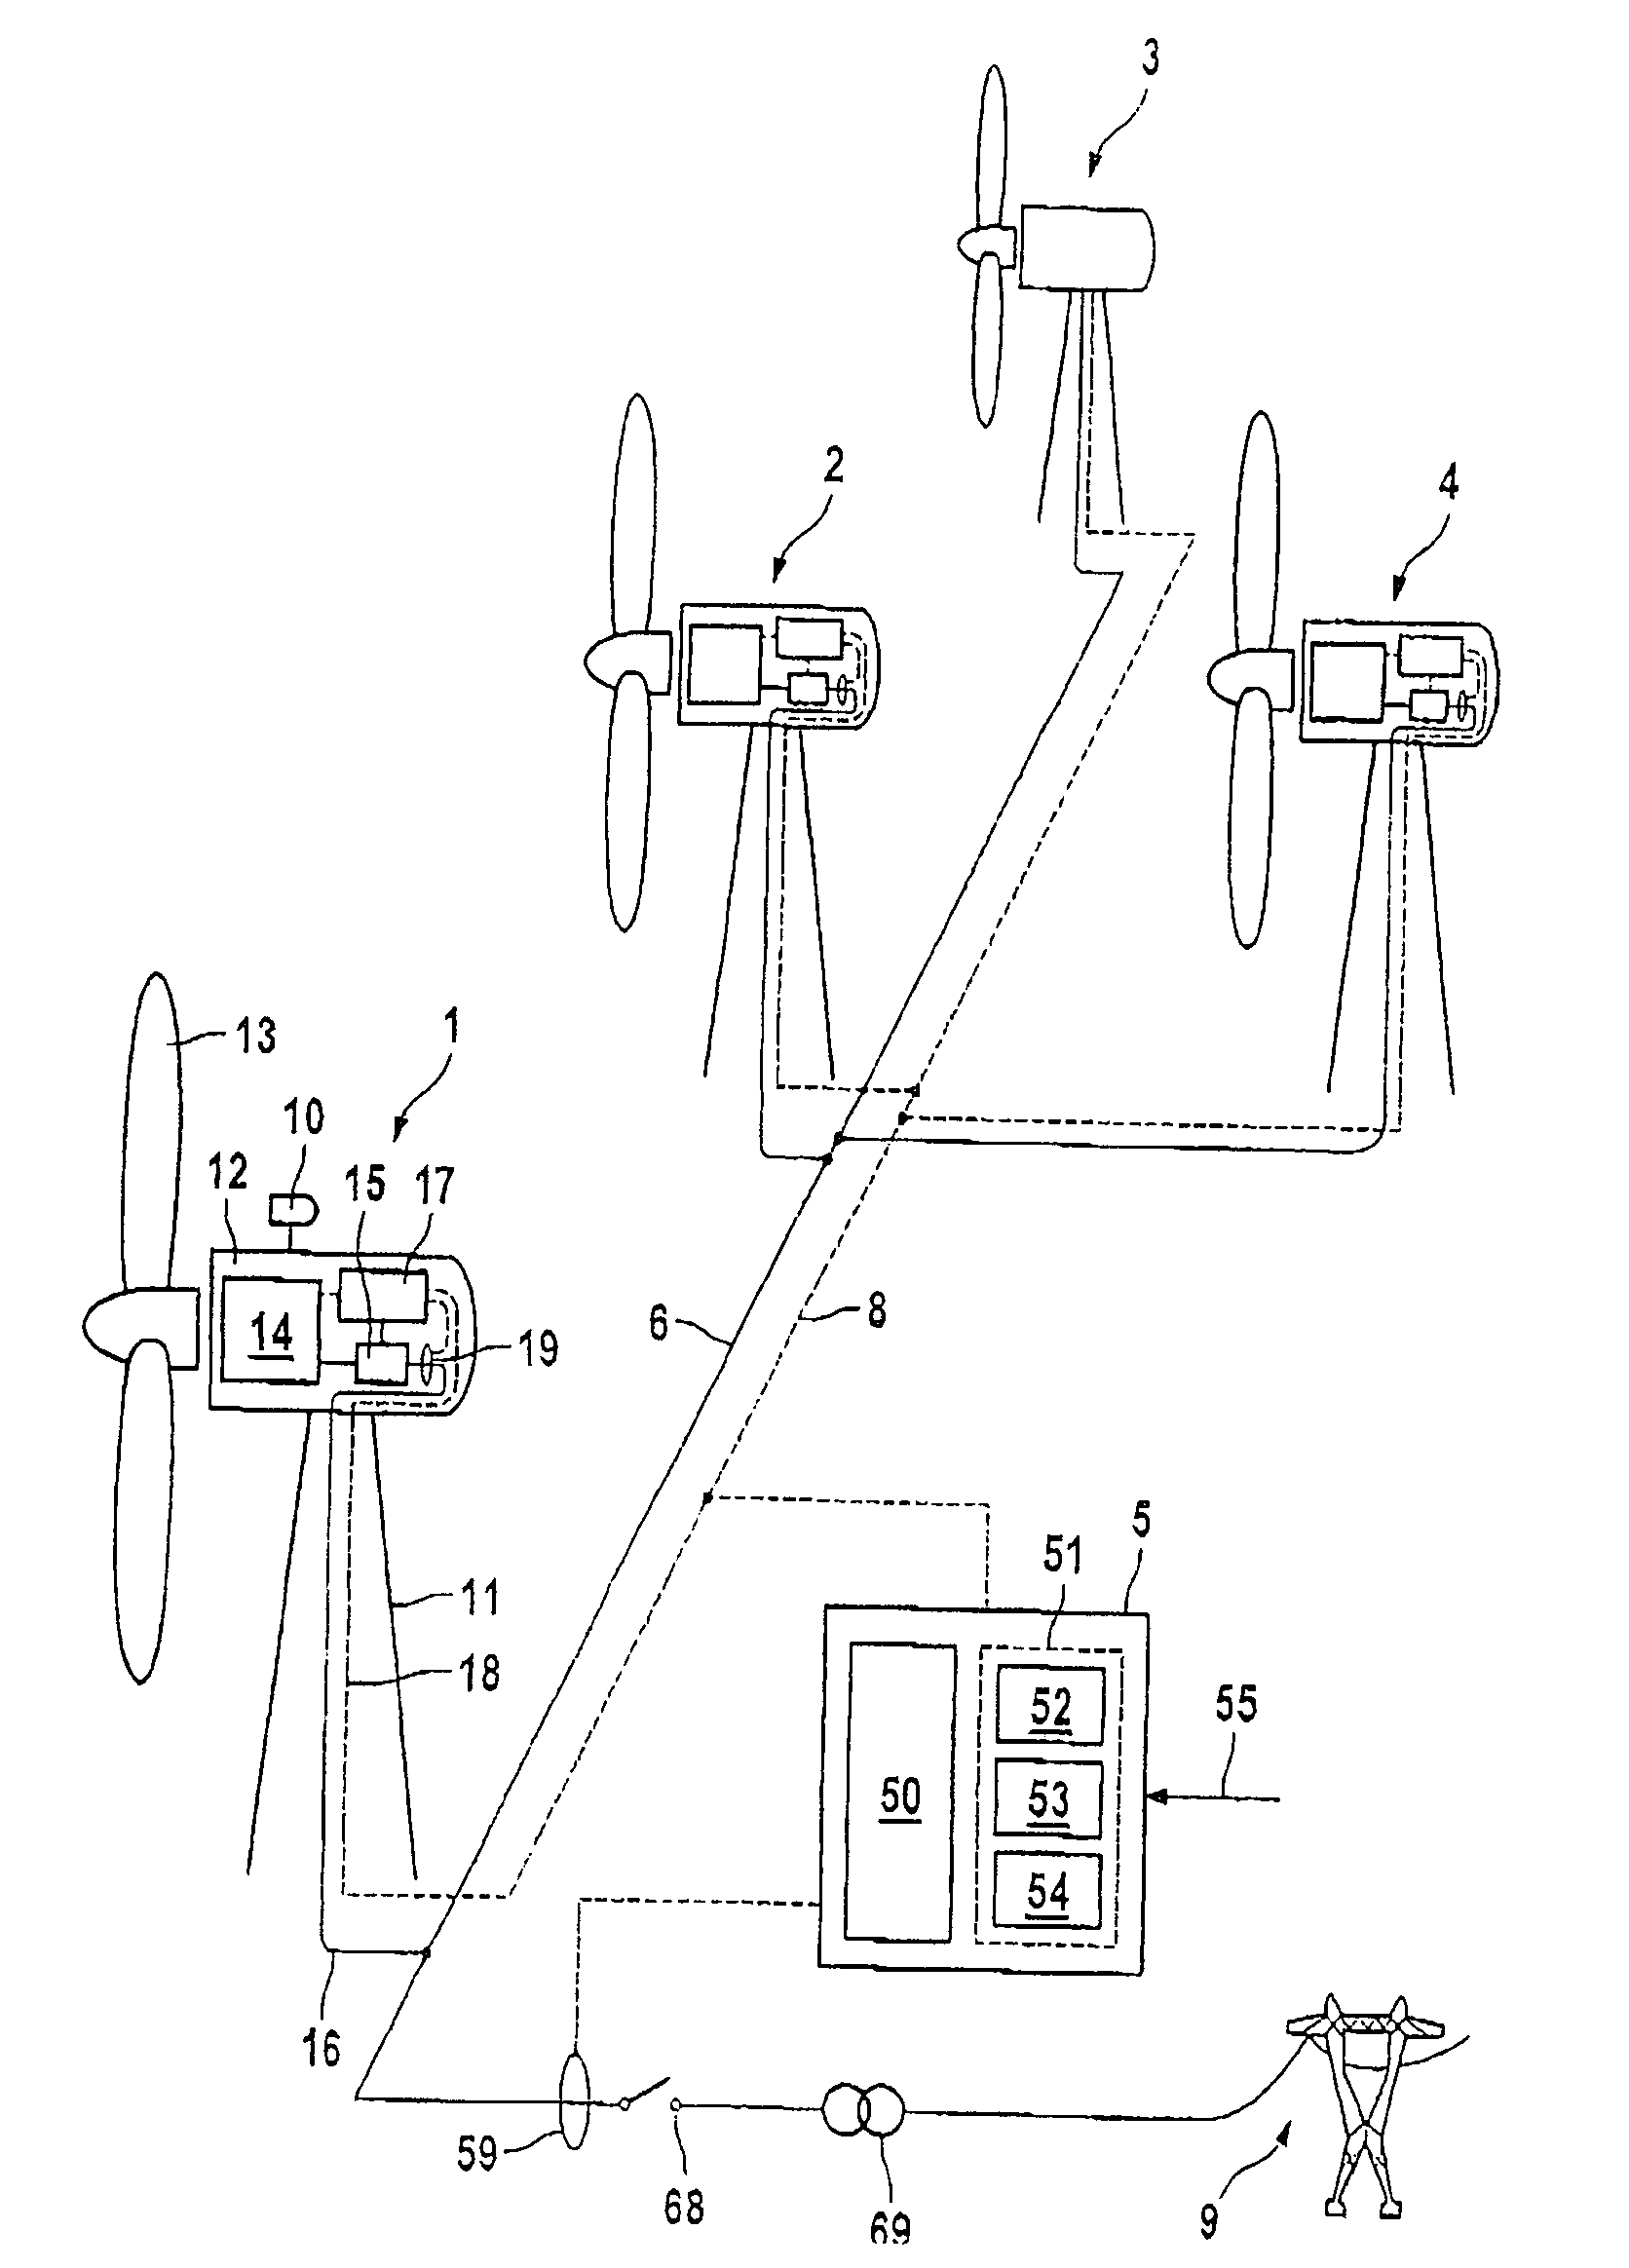 Method for optimizing the operation of wind farms